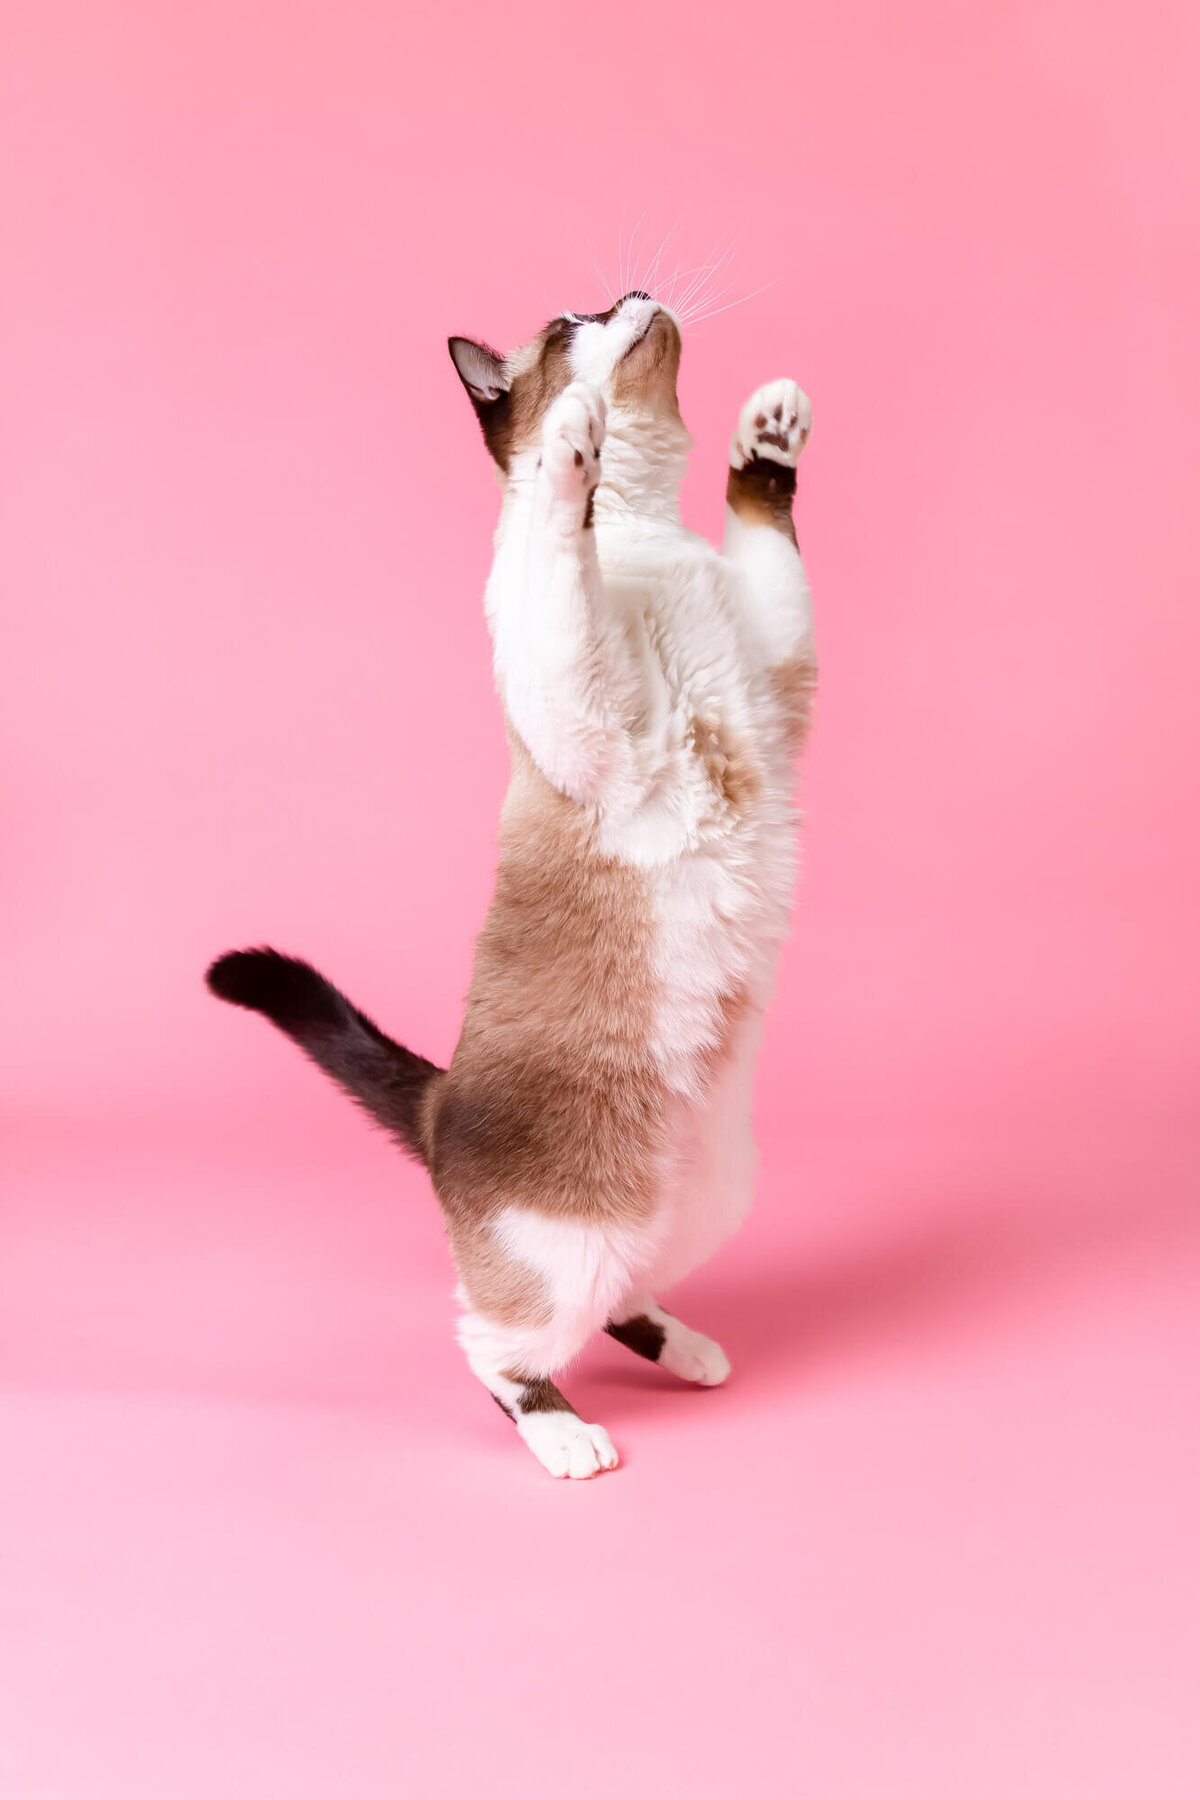 White and brown cat standing on its hind legs on pink backdrop